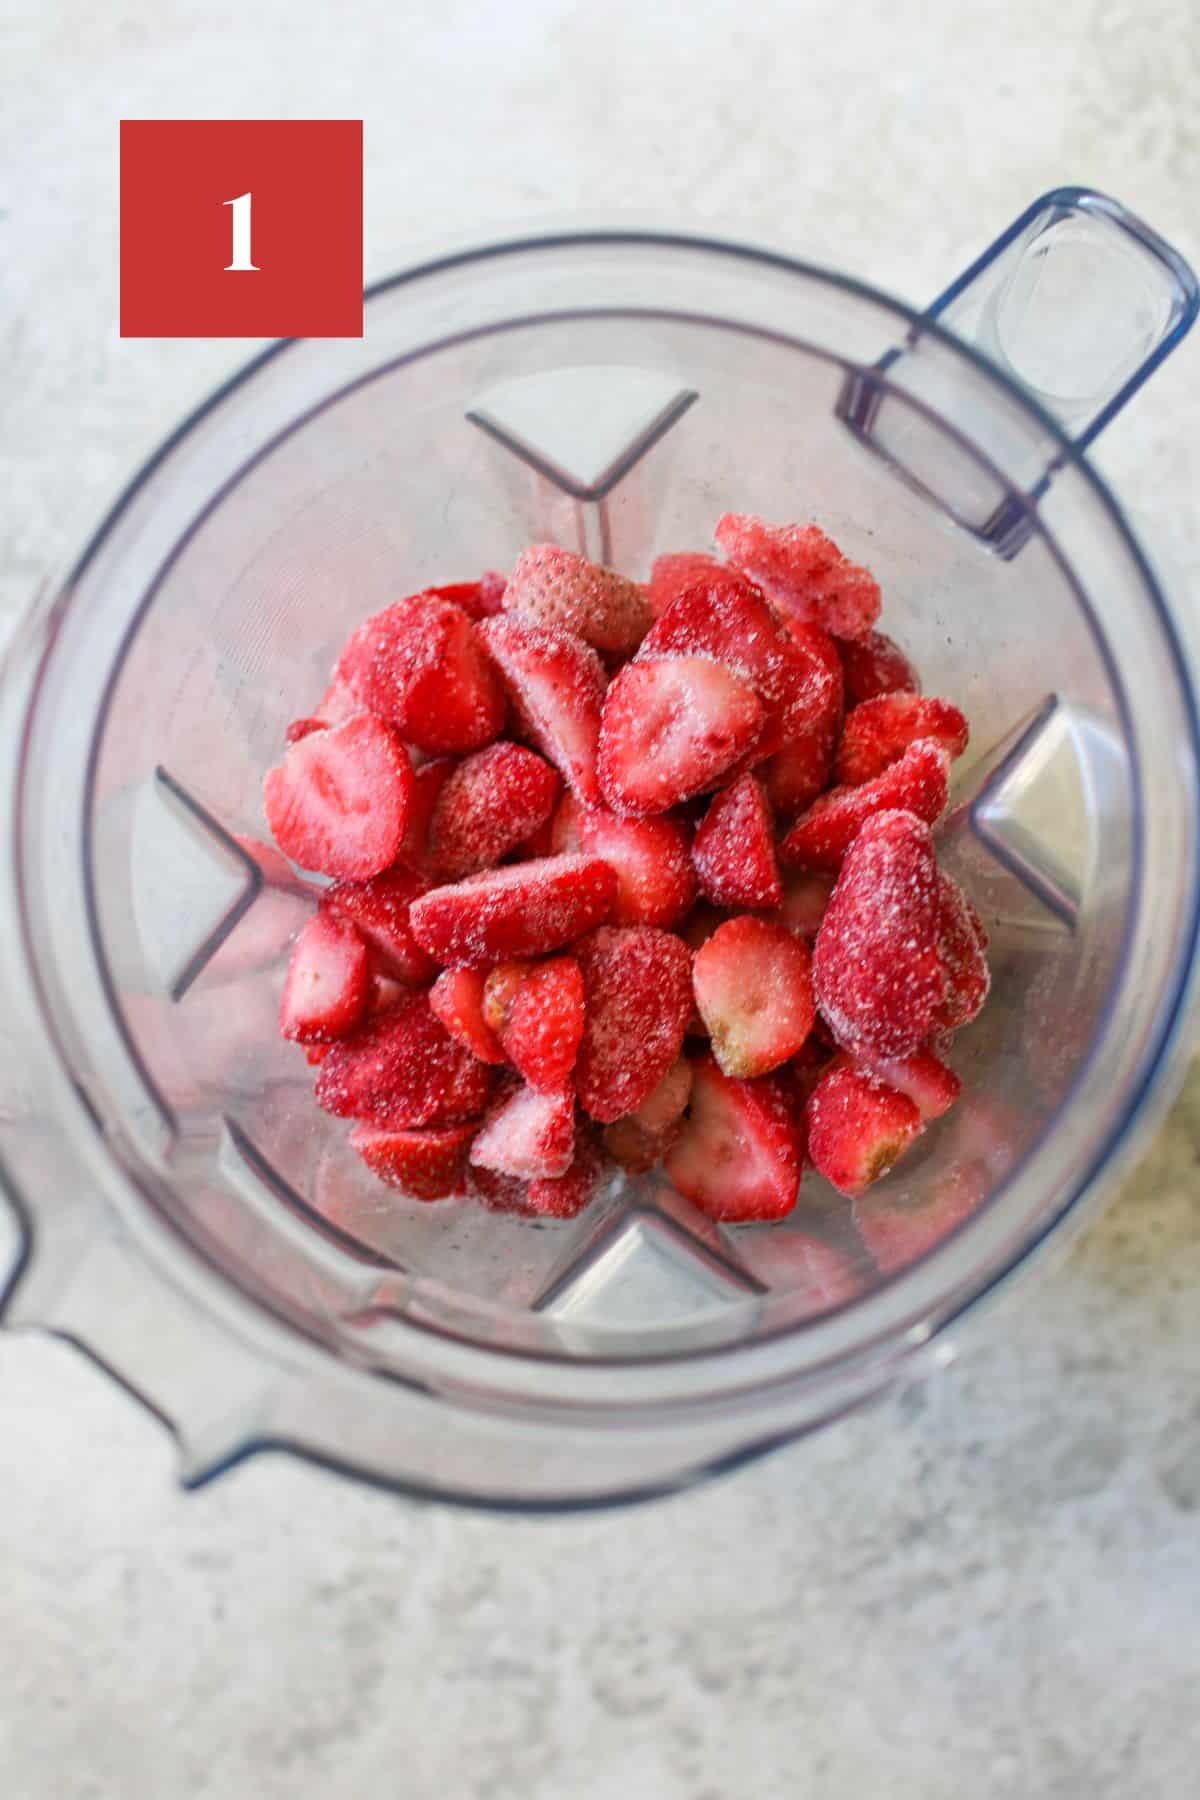 Sliced frozen strawberries in a blender body on a stone background. In the upper left corner is a dark red square with a white '1' in the center.